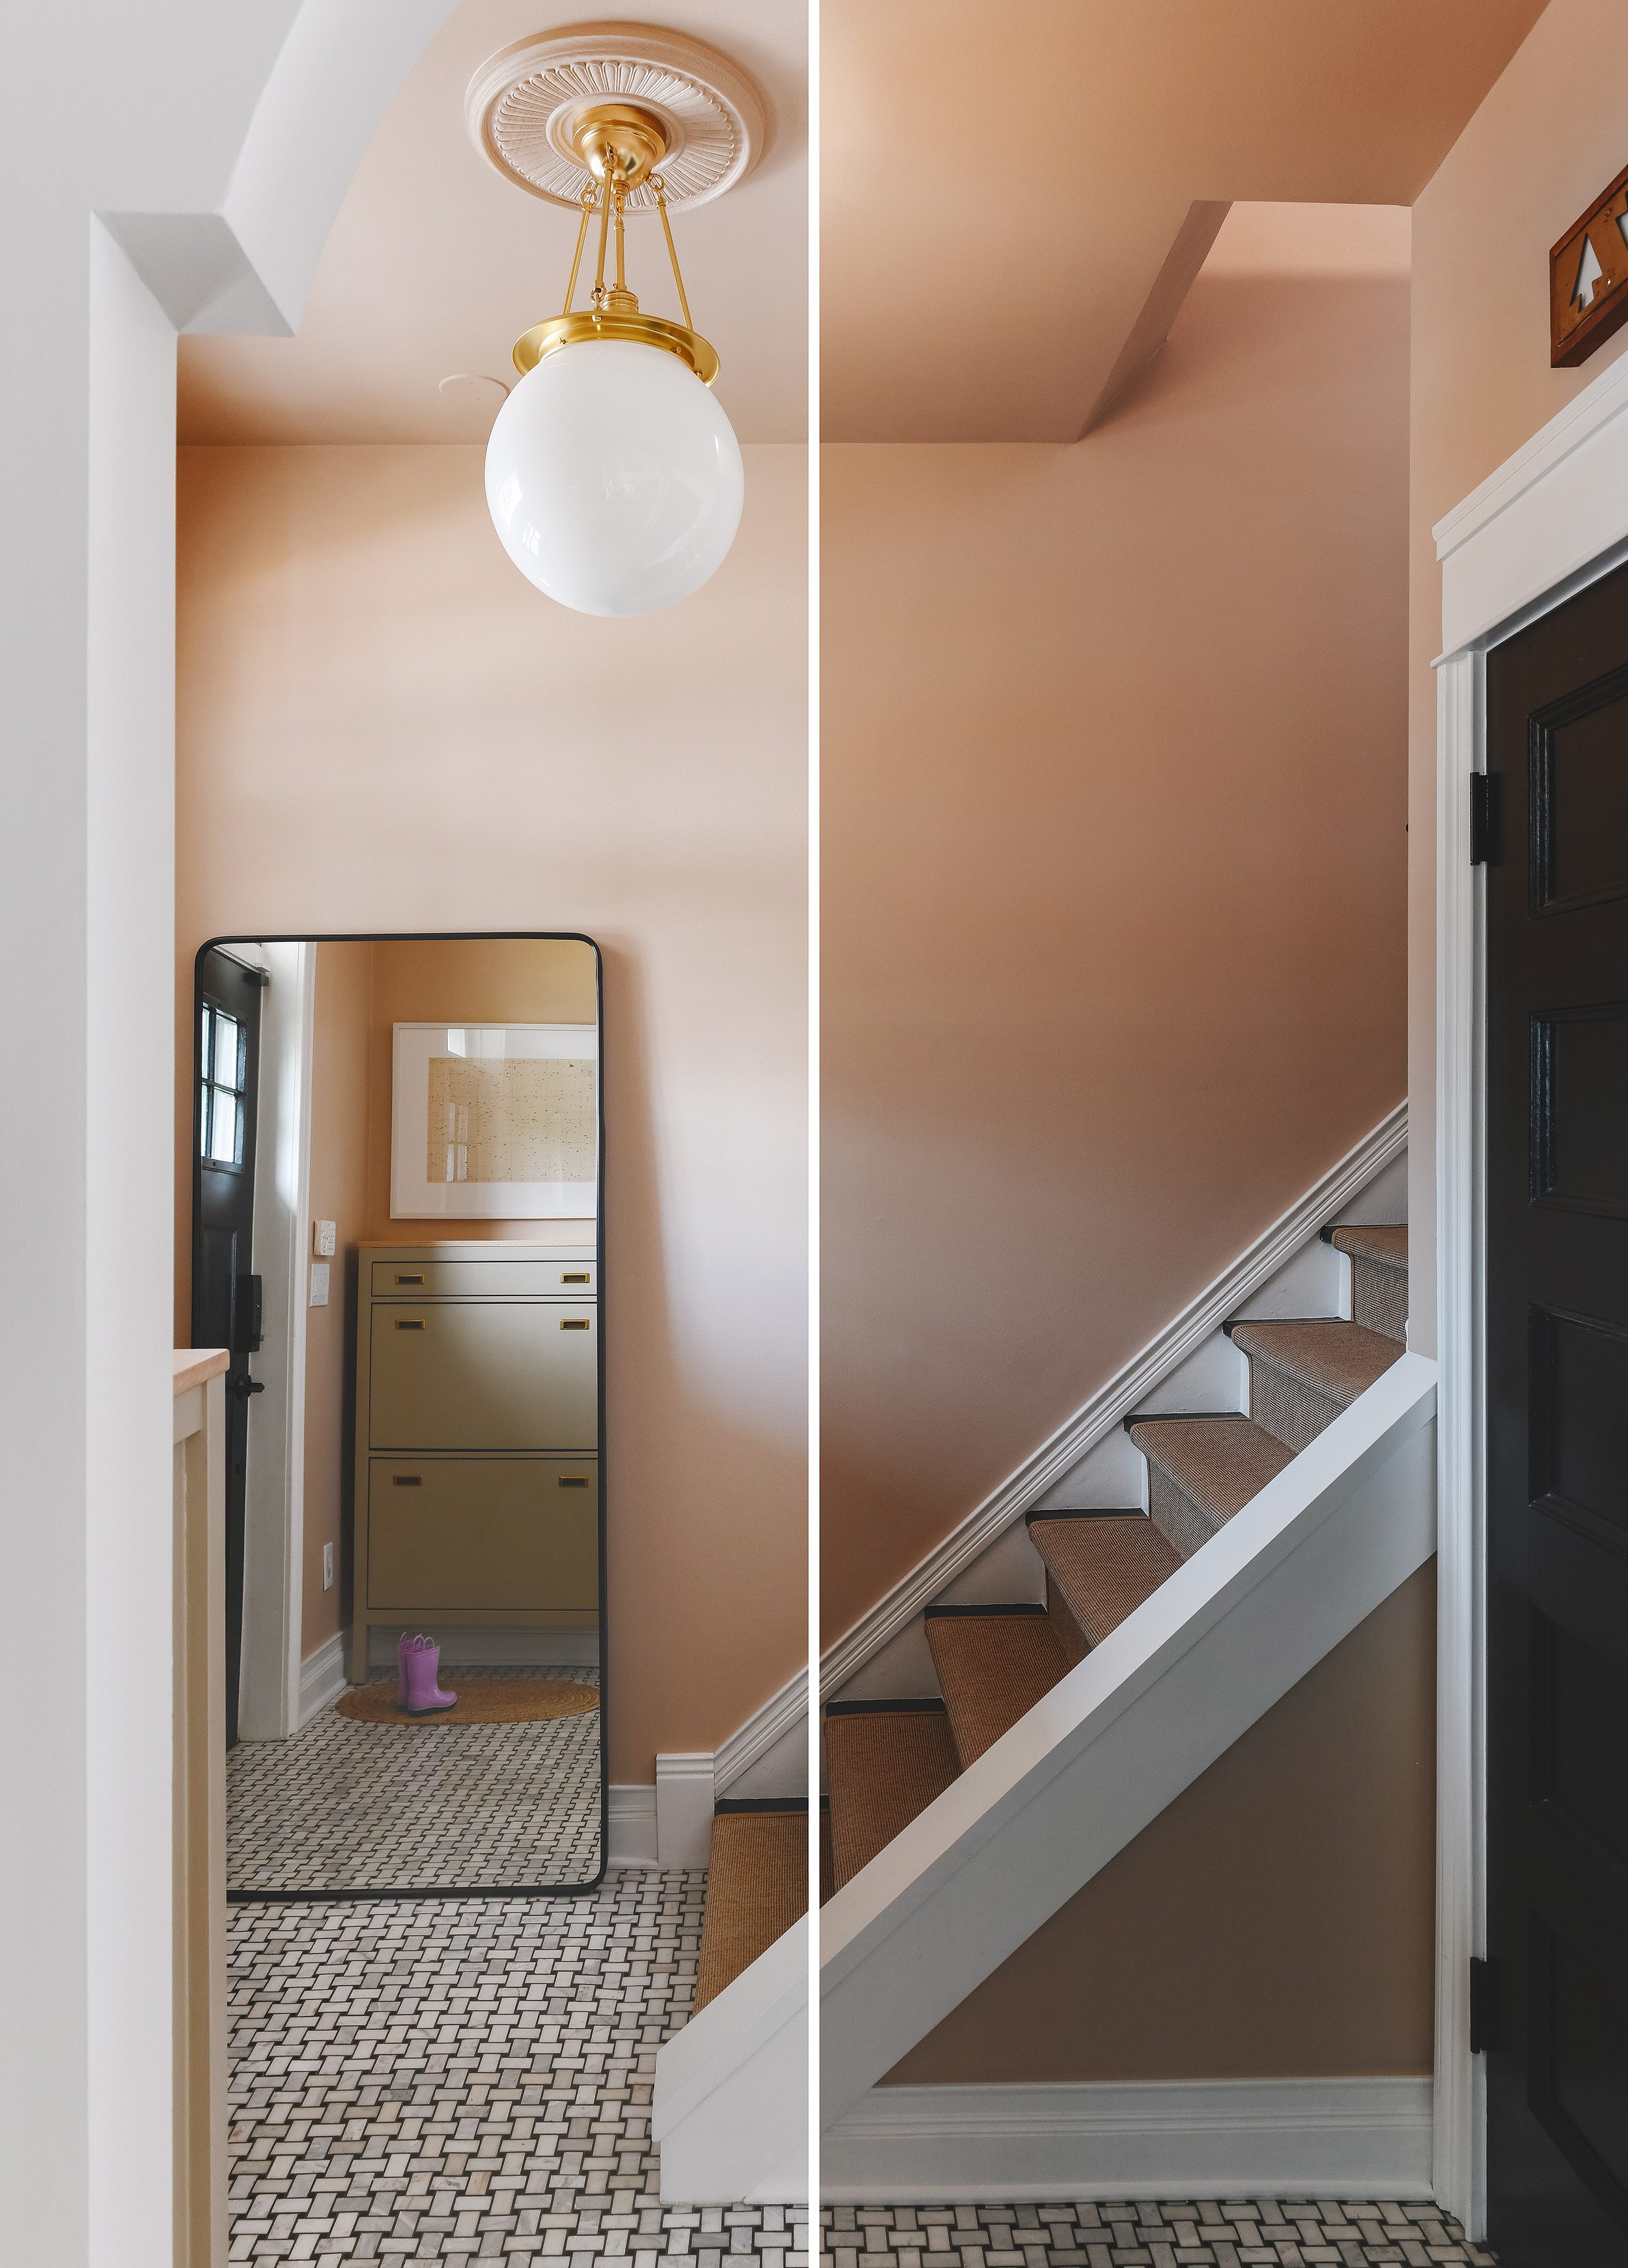 Valspar's Milk Toast in our entryway at different times of day | via Yellow Brick Home